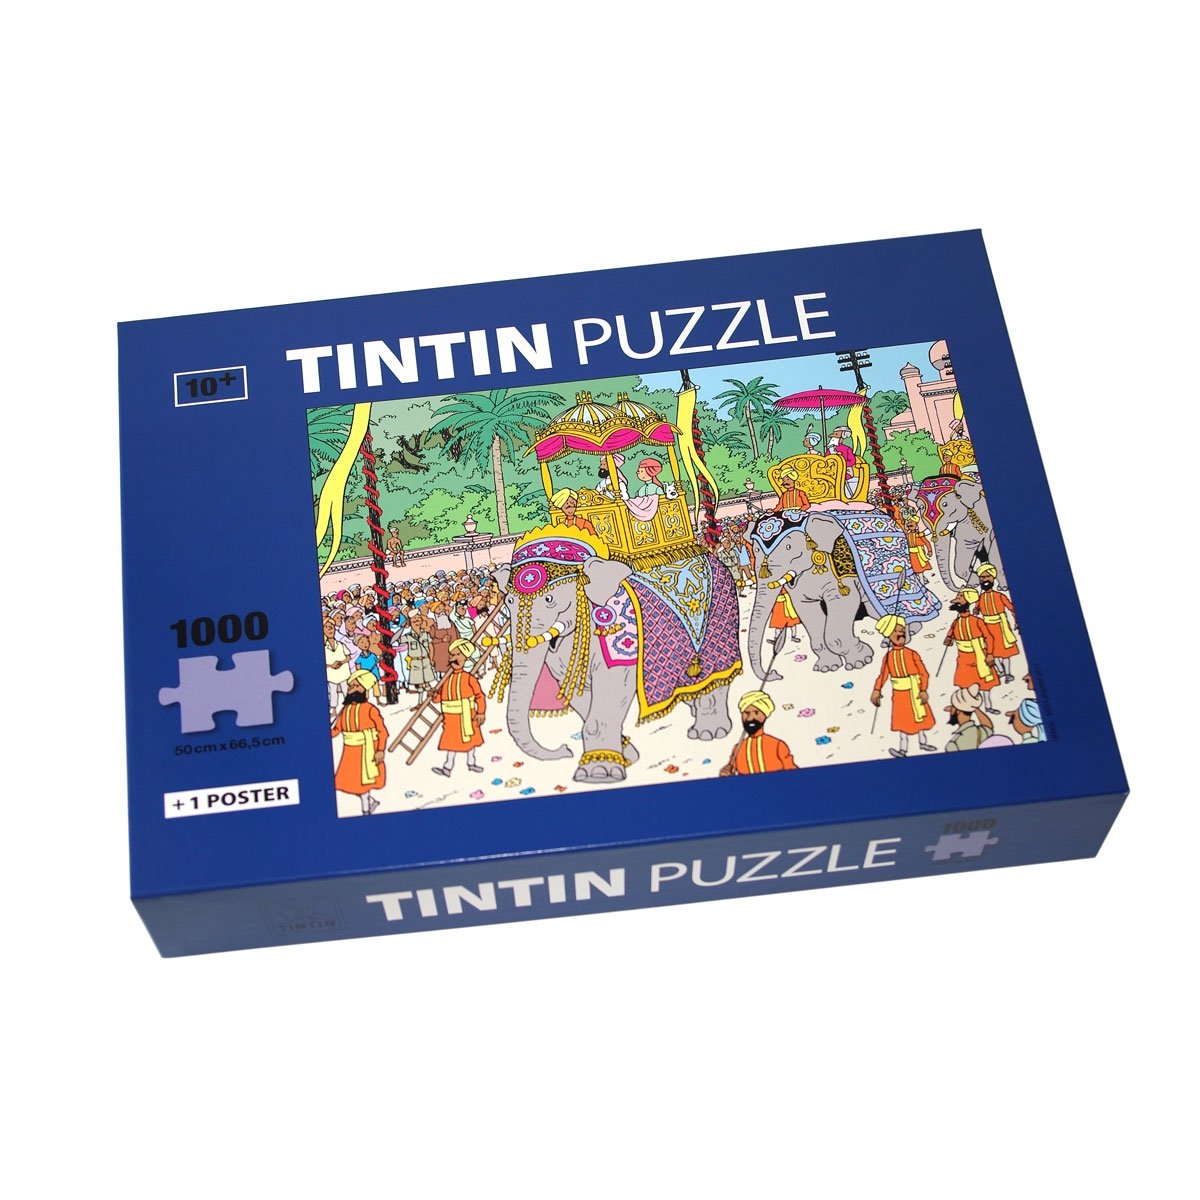 1000 pcs puzzle - Elephant Parade Puzzle and poster